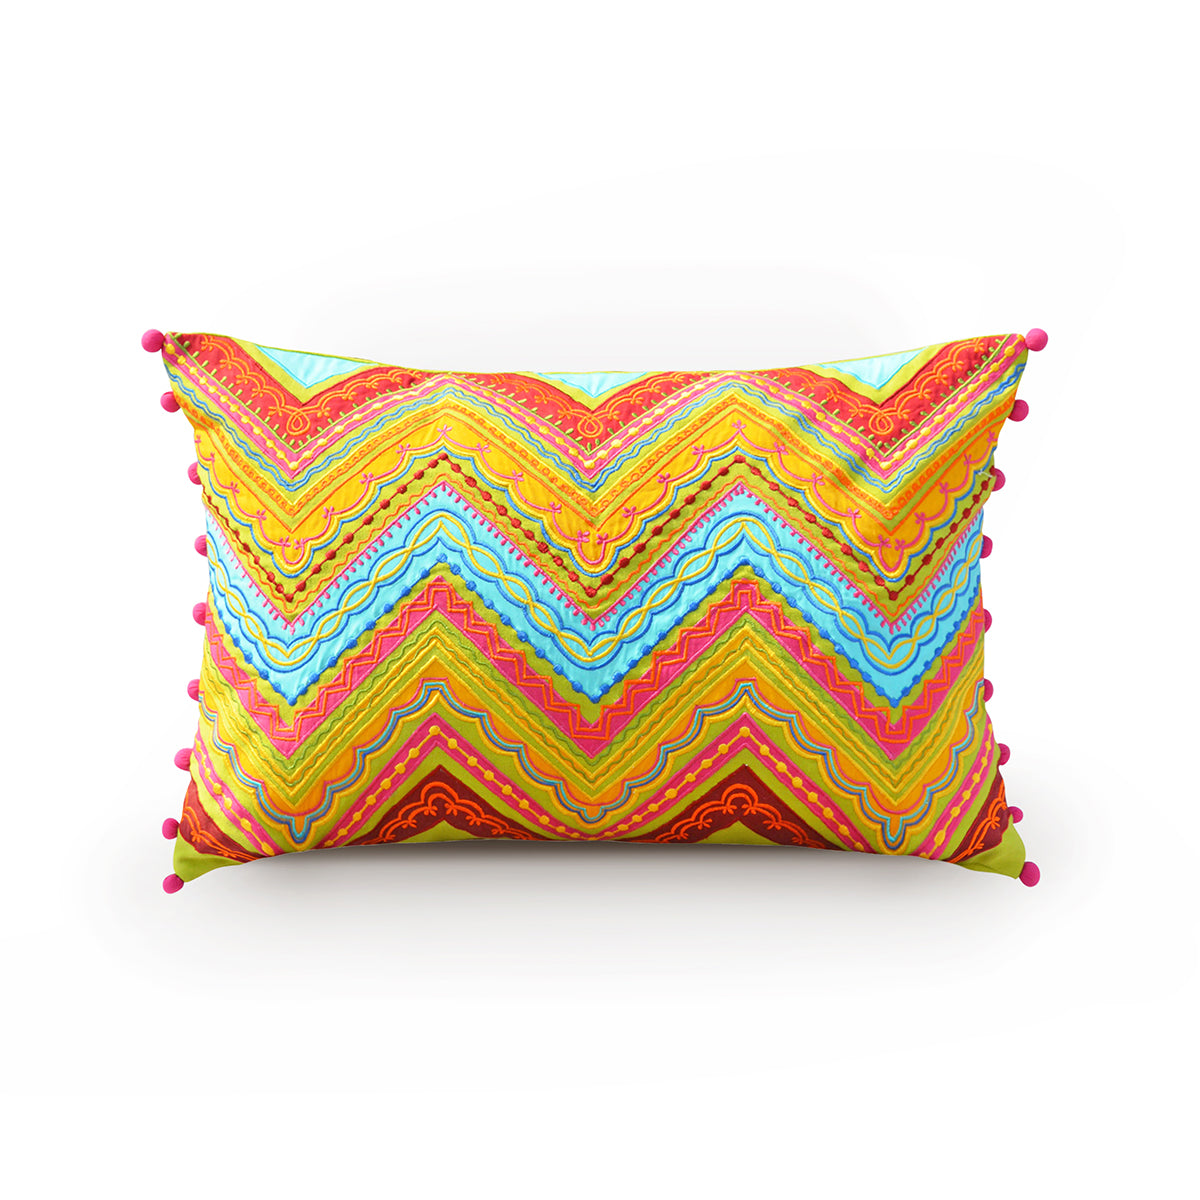 Stylized floral - Obong embroidered pillow, zigzag pattern, 14X21 inches